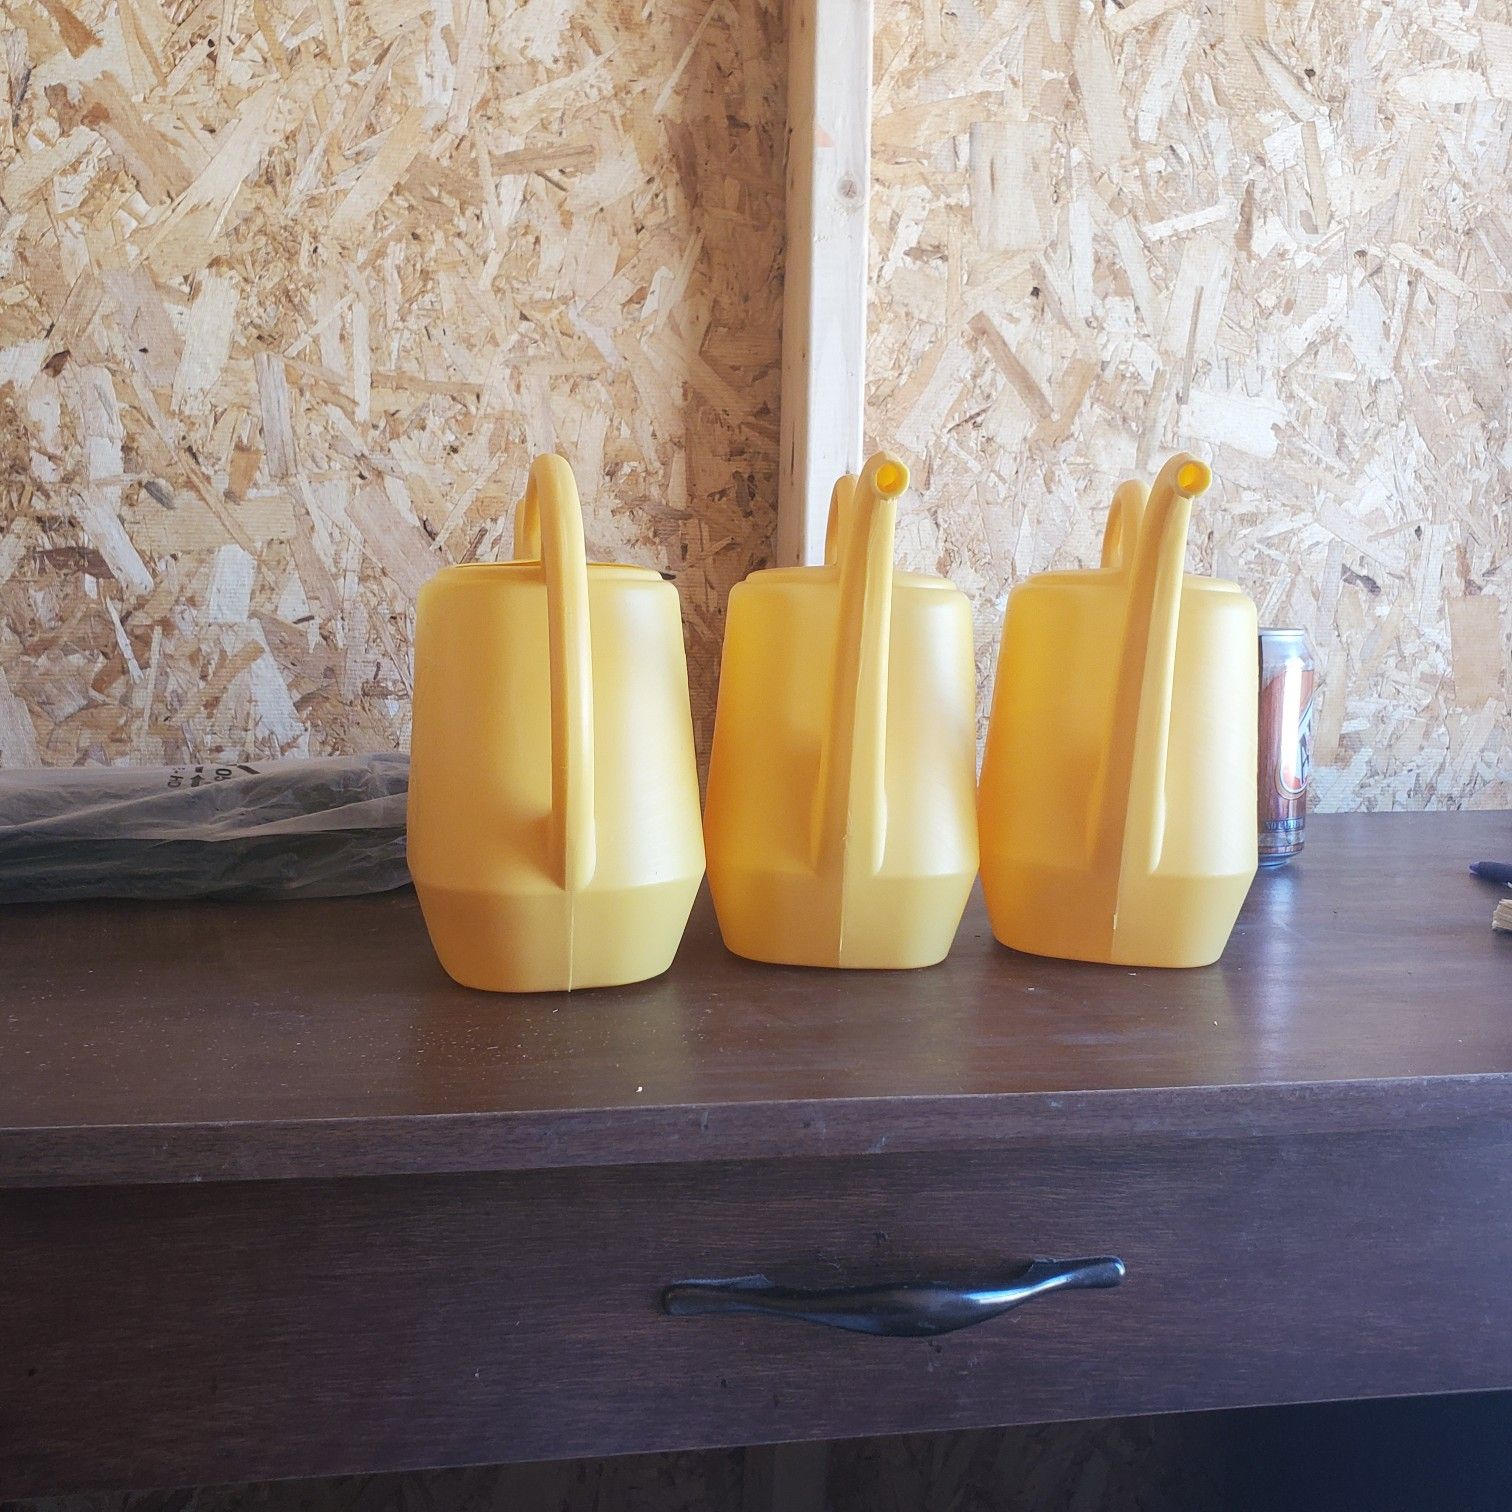 Yellow plastic watering cans